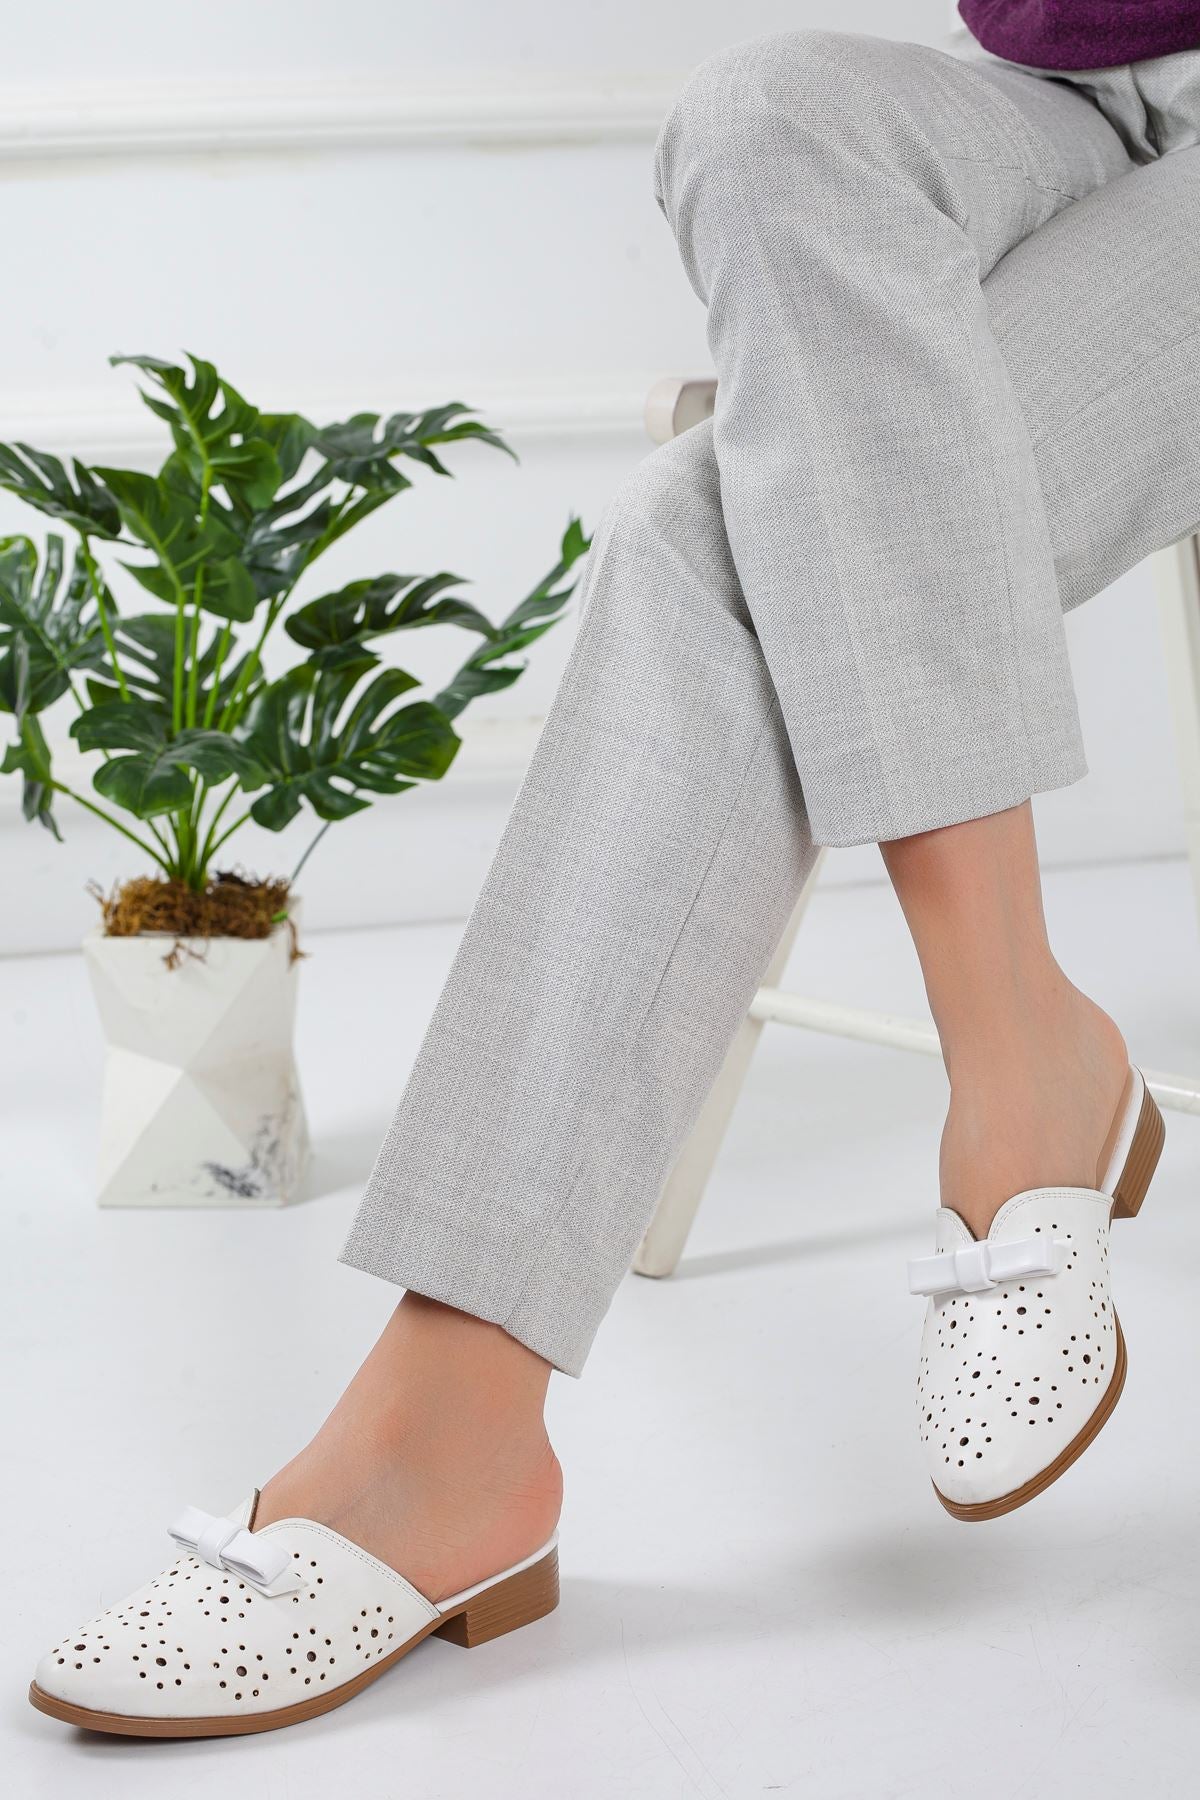 Image of Women's White Casual Slippers